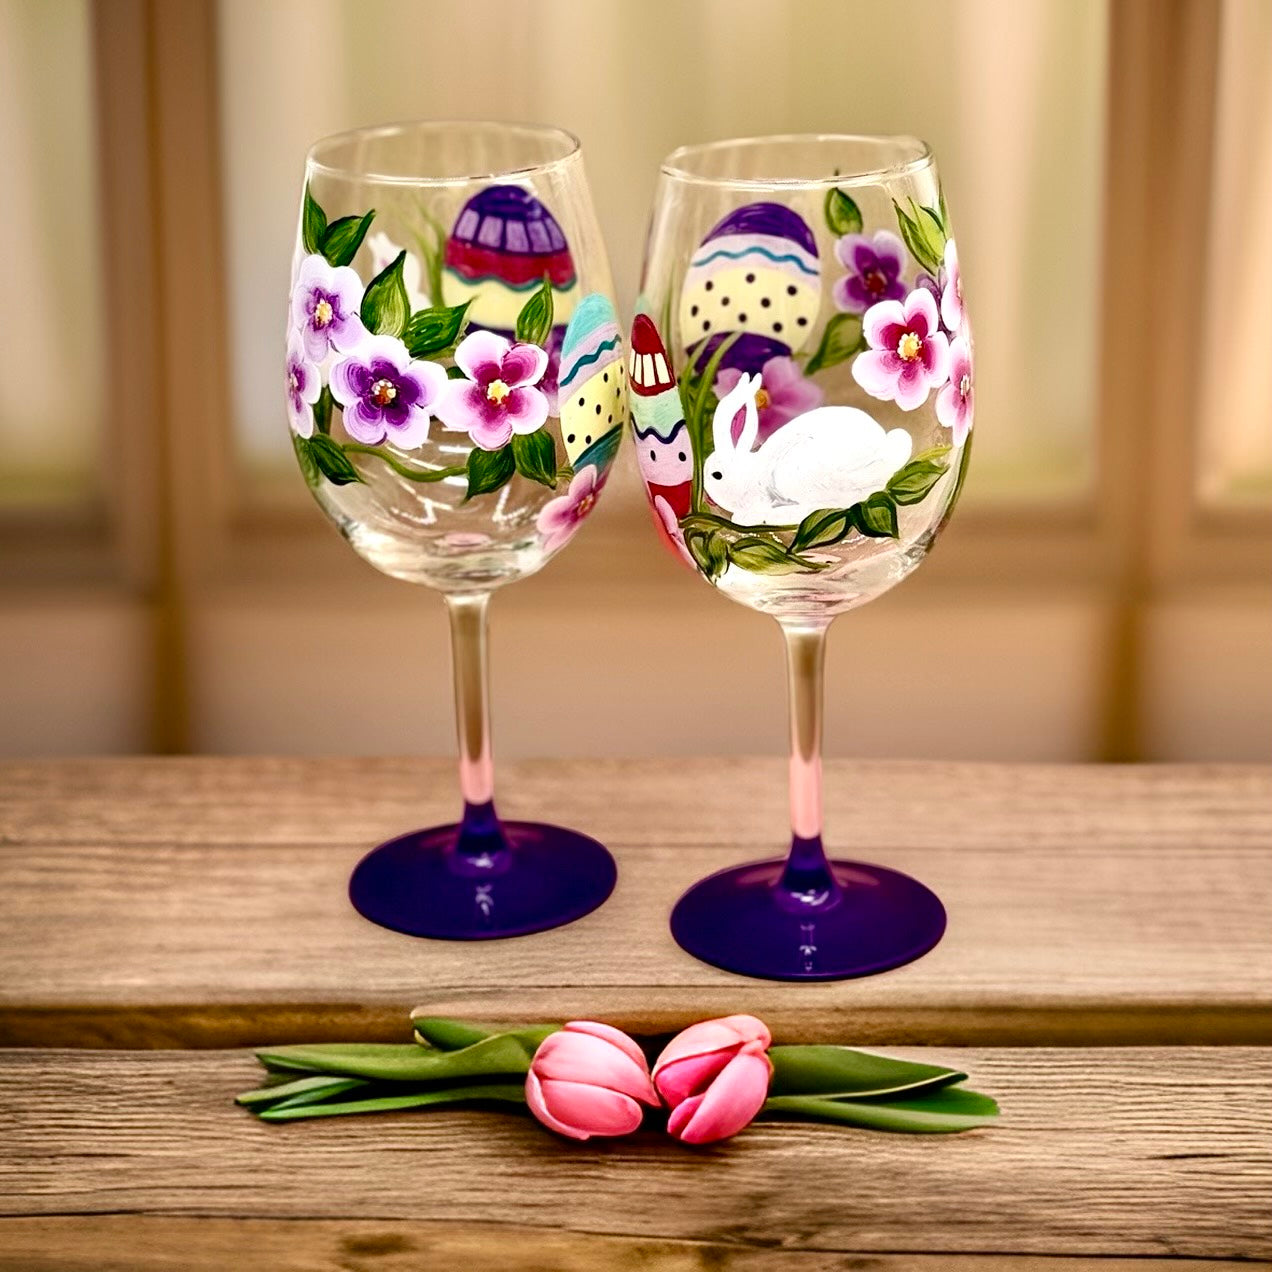 Sip & Paint - Bunny and Eggs Wine Glass (Thurs, March 28th)